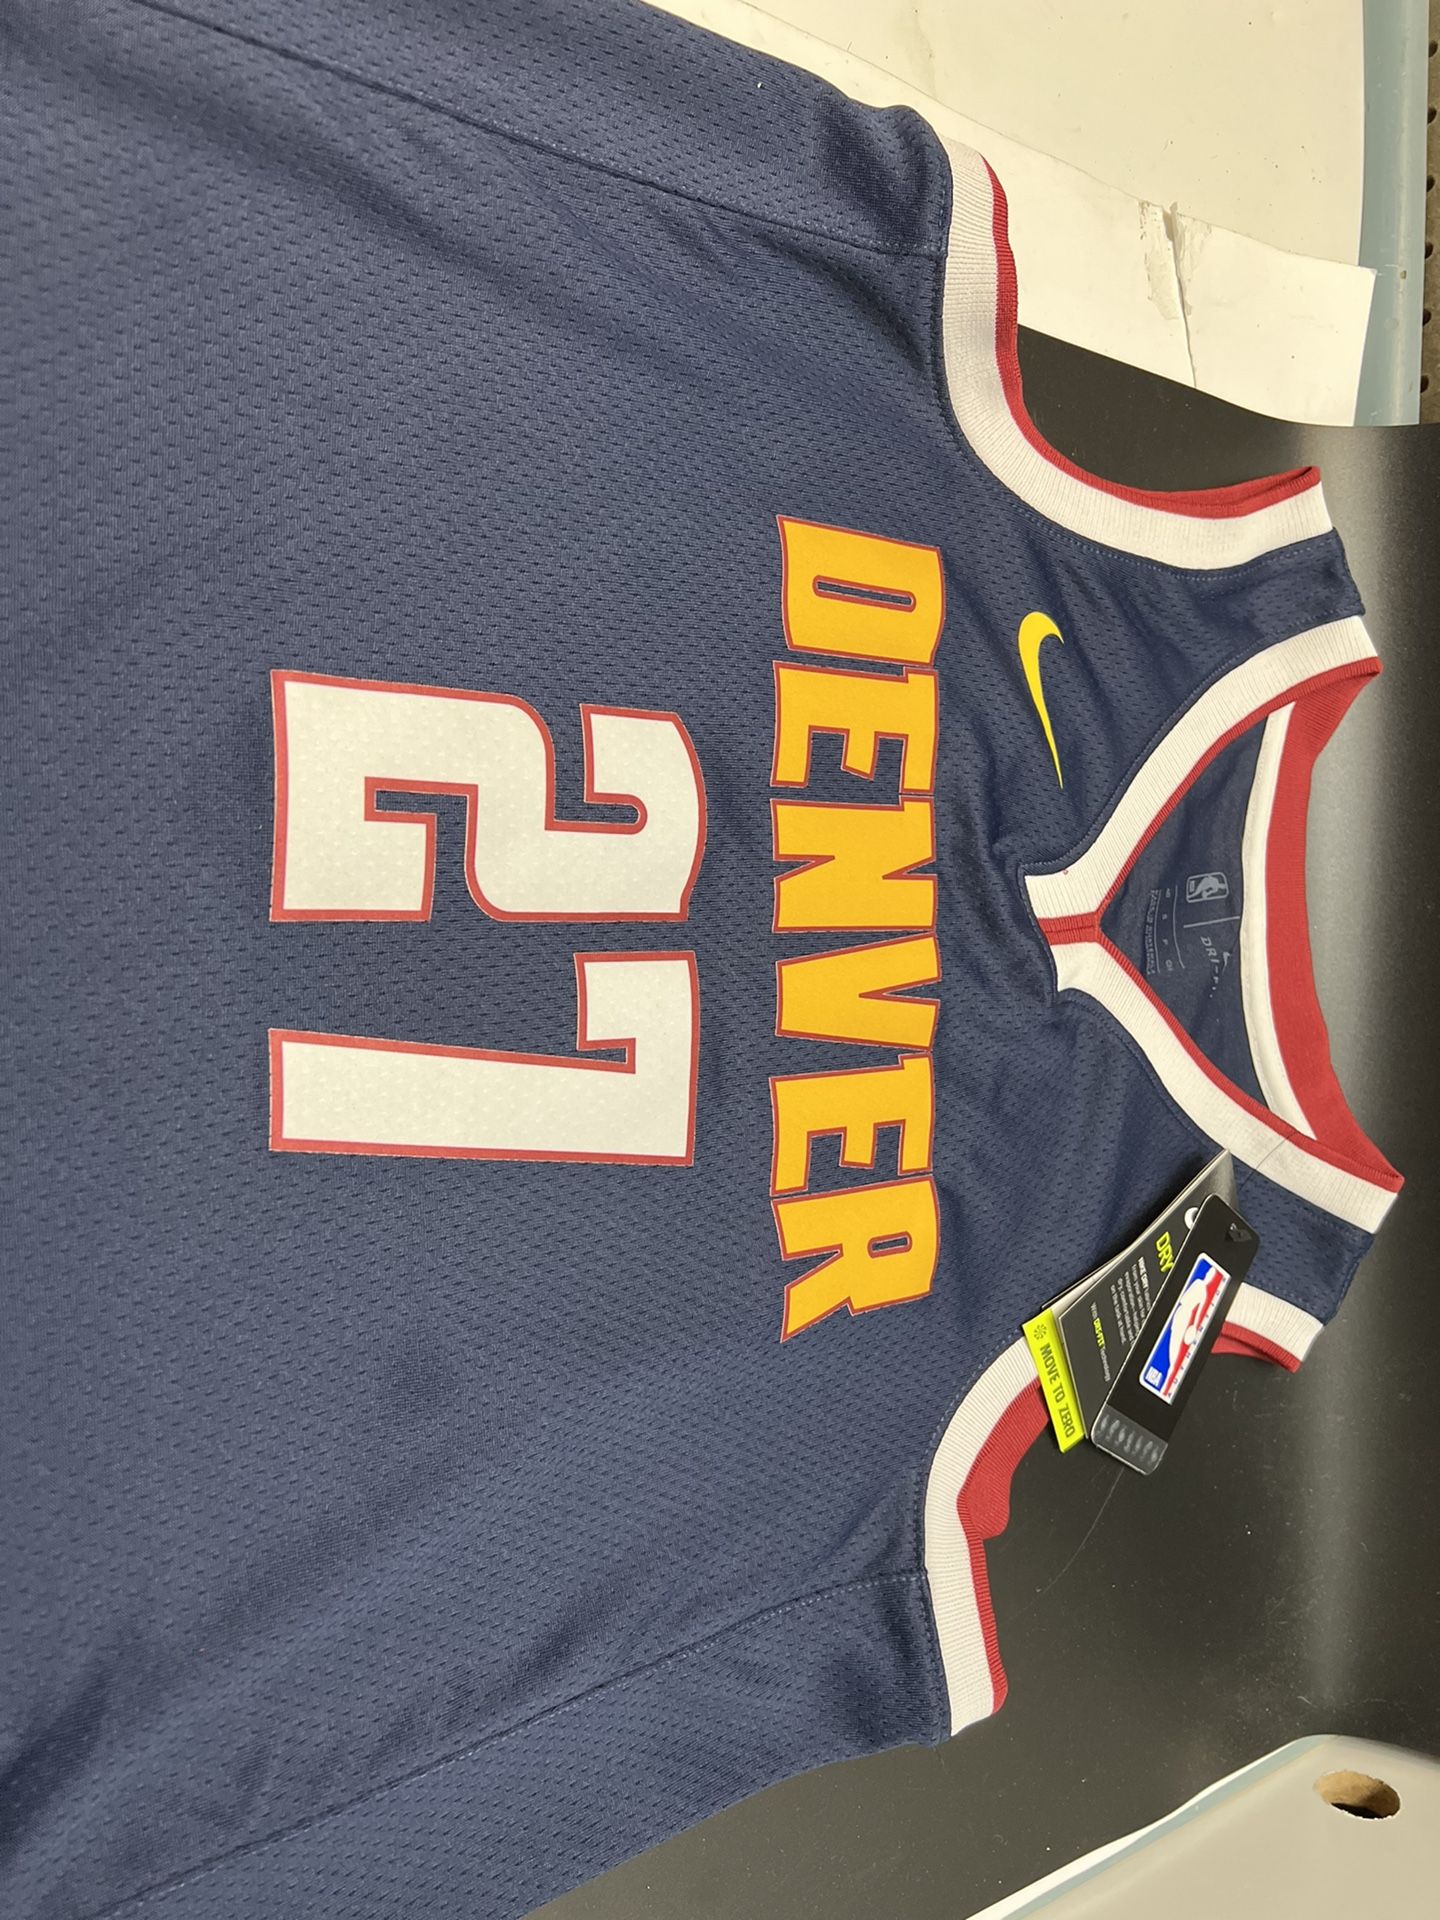 Jamal Murray Jersey Denver Nuggets Large Black City Edition #27 for Sale in  Lake Elsinore, CA - OfferUp